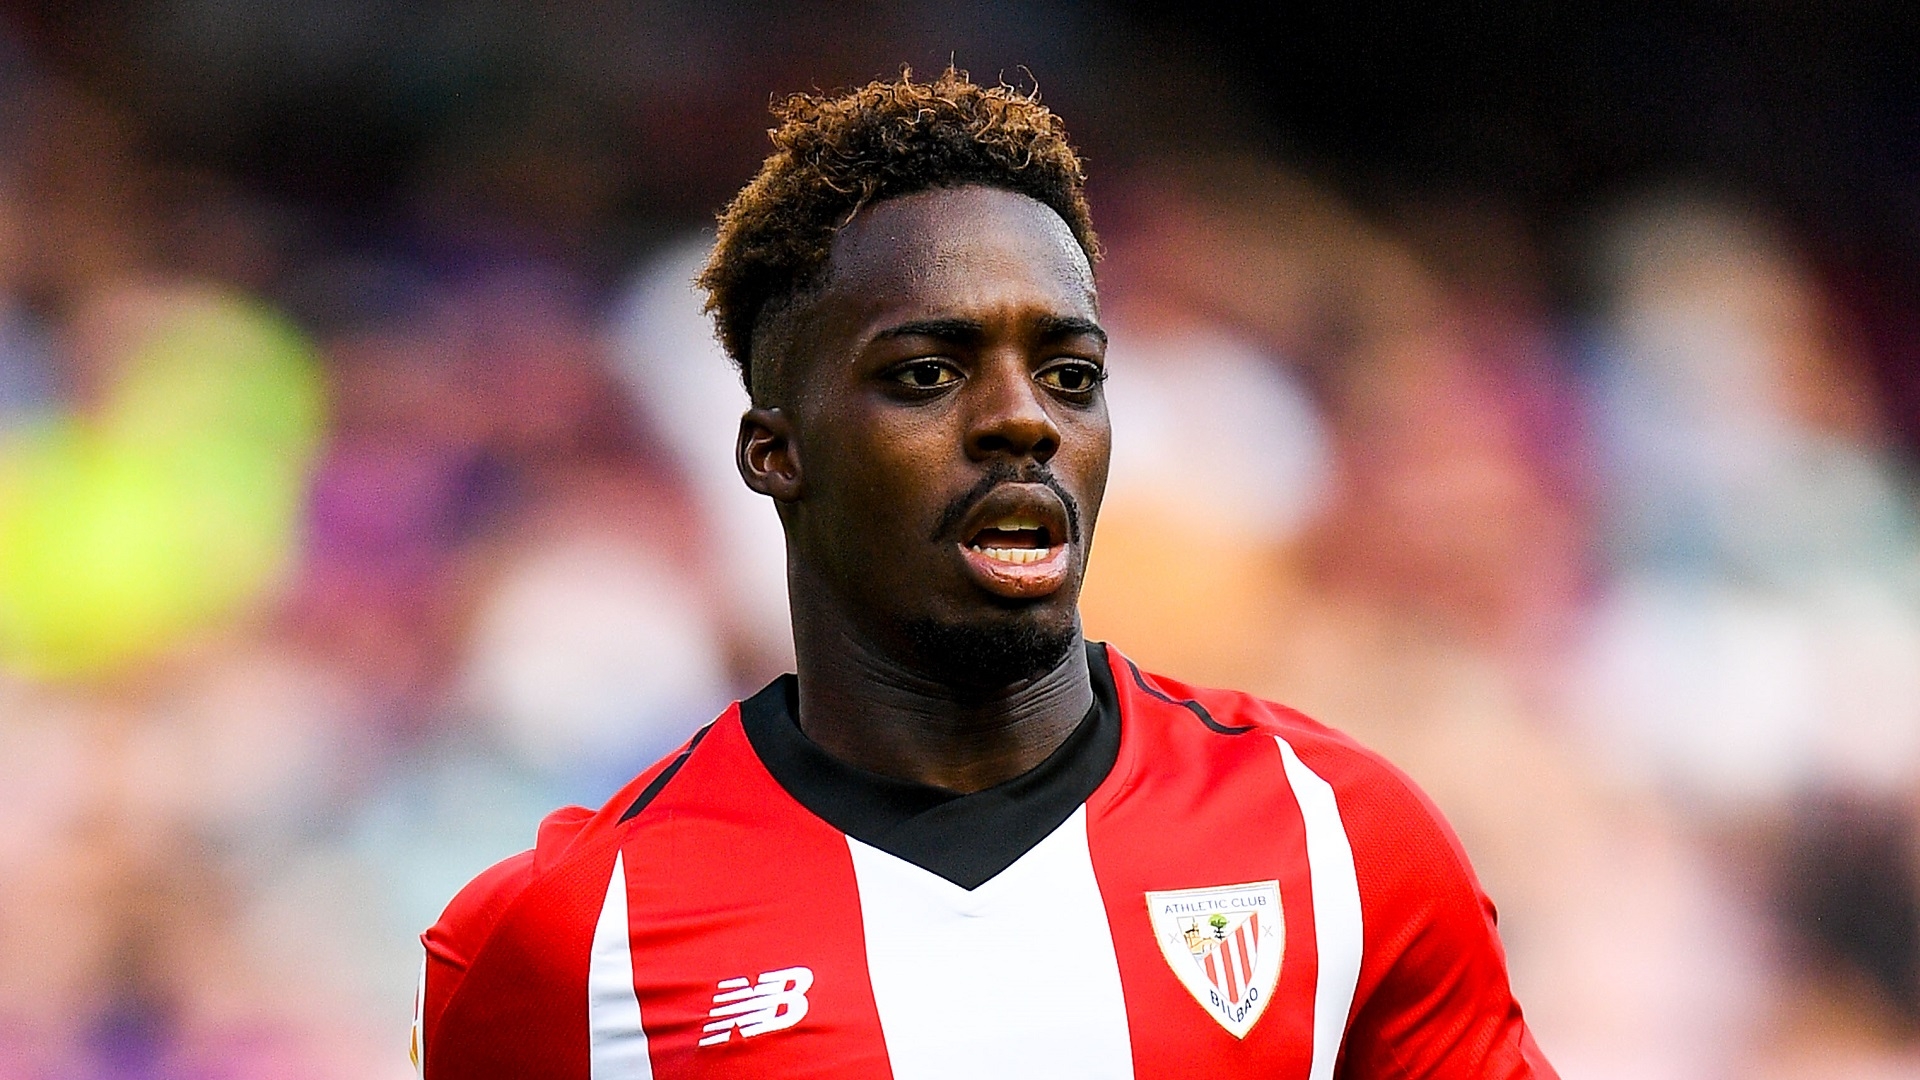 Inaki Williams to miss AFCON qualifier due to injury 